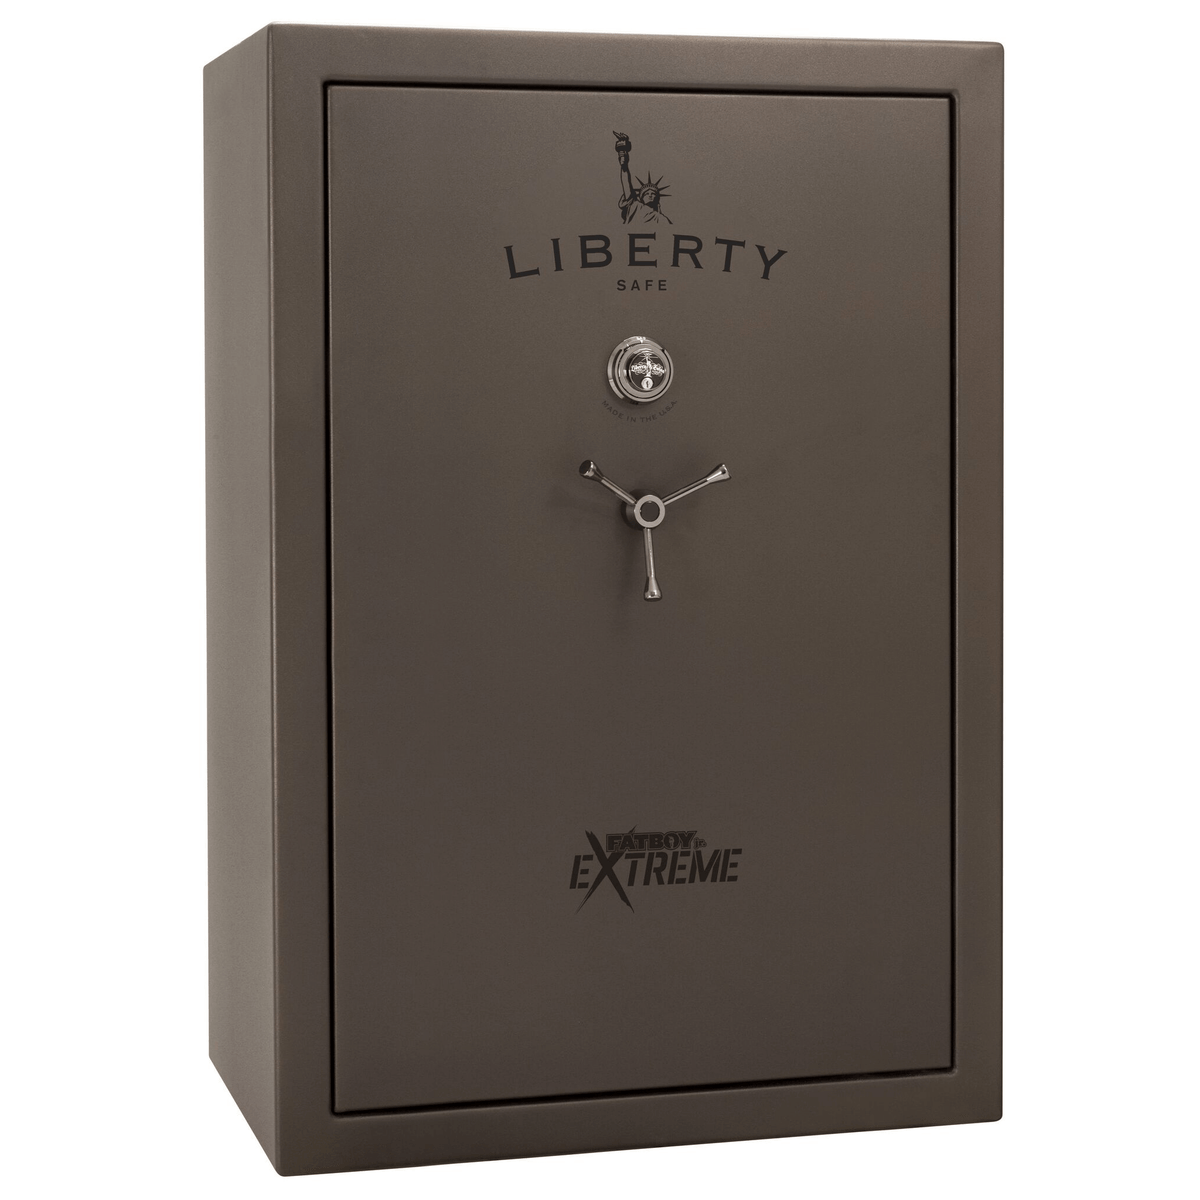 Fatboy Junior Extreme Safe in Textured Bronze with Black Chrome Mechanical Lock.